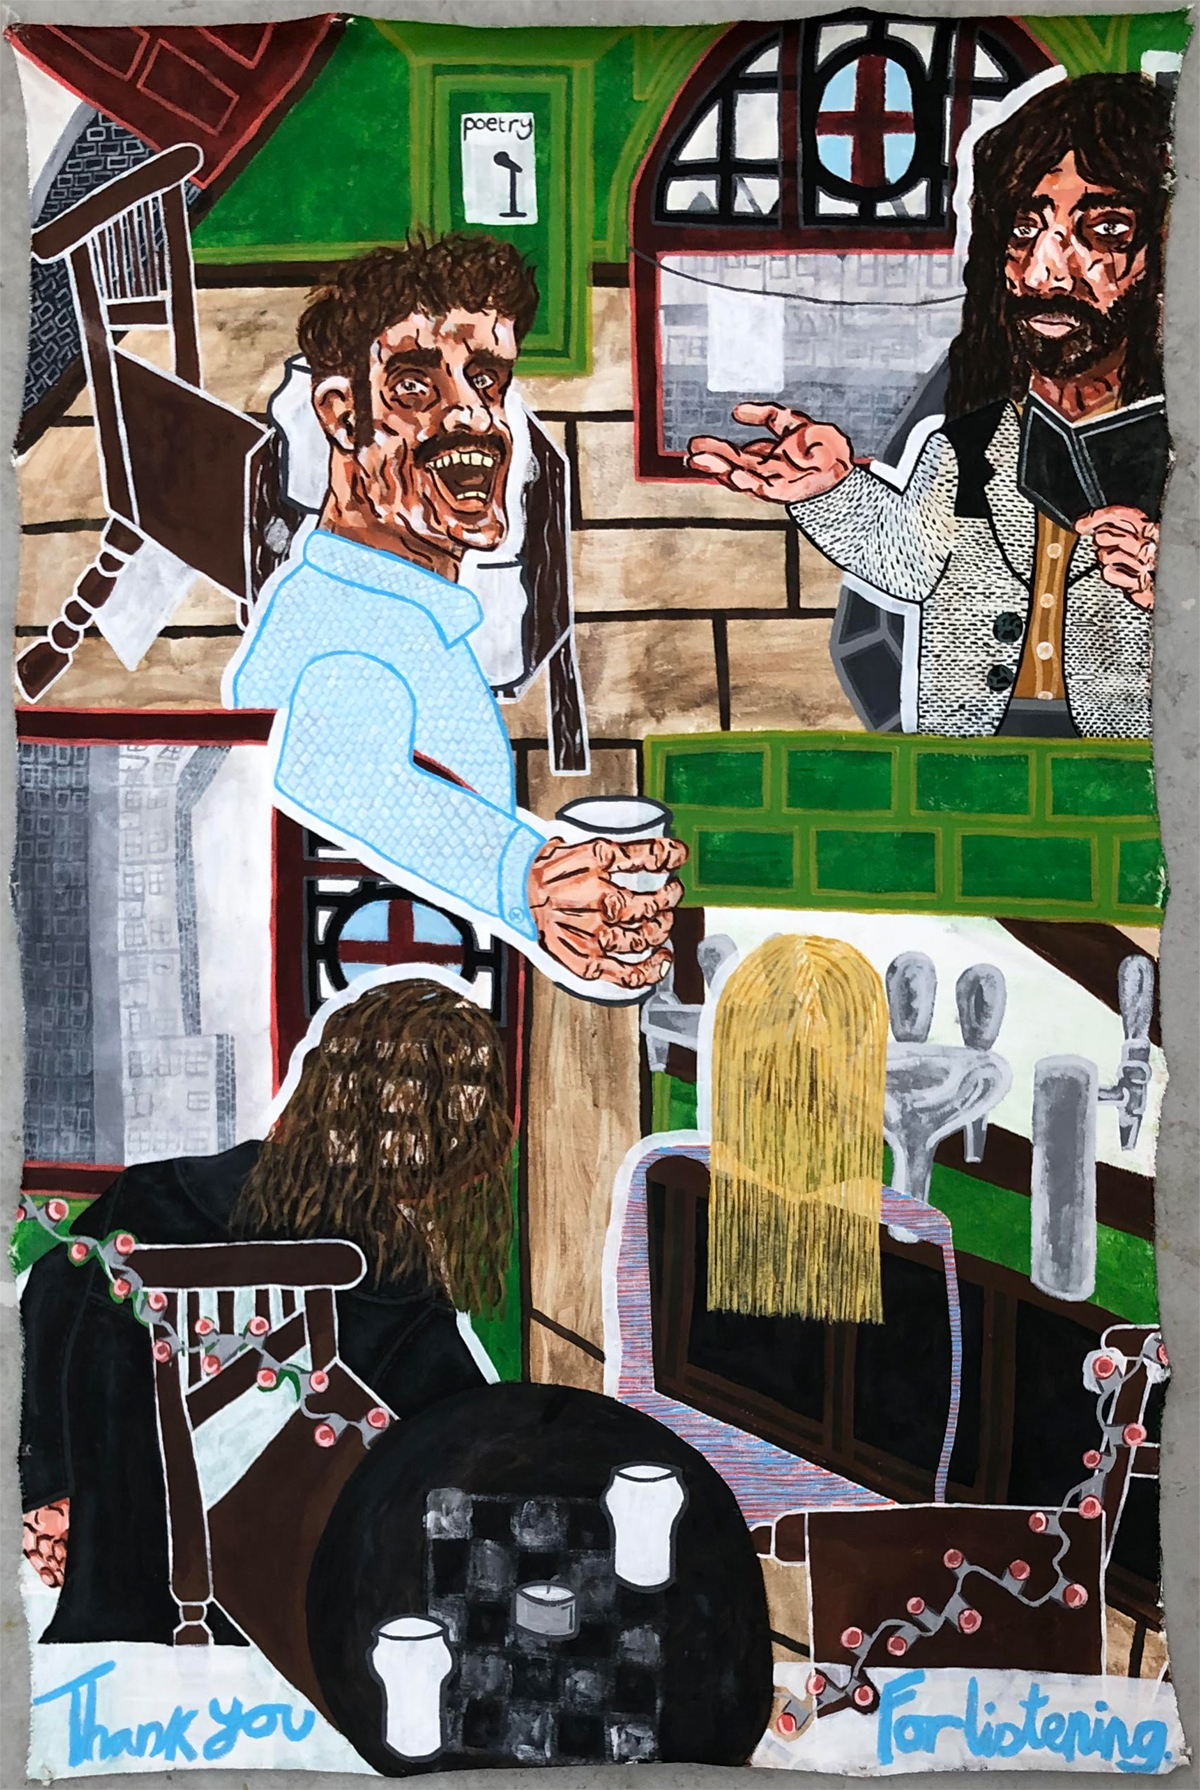 A colourful painting of a pub, with two figures facing the audience in the top half of the image, and two sitting at the bar in the bottom half, with their backs to the viewer.